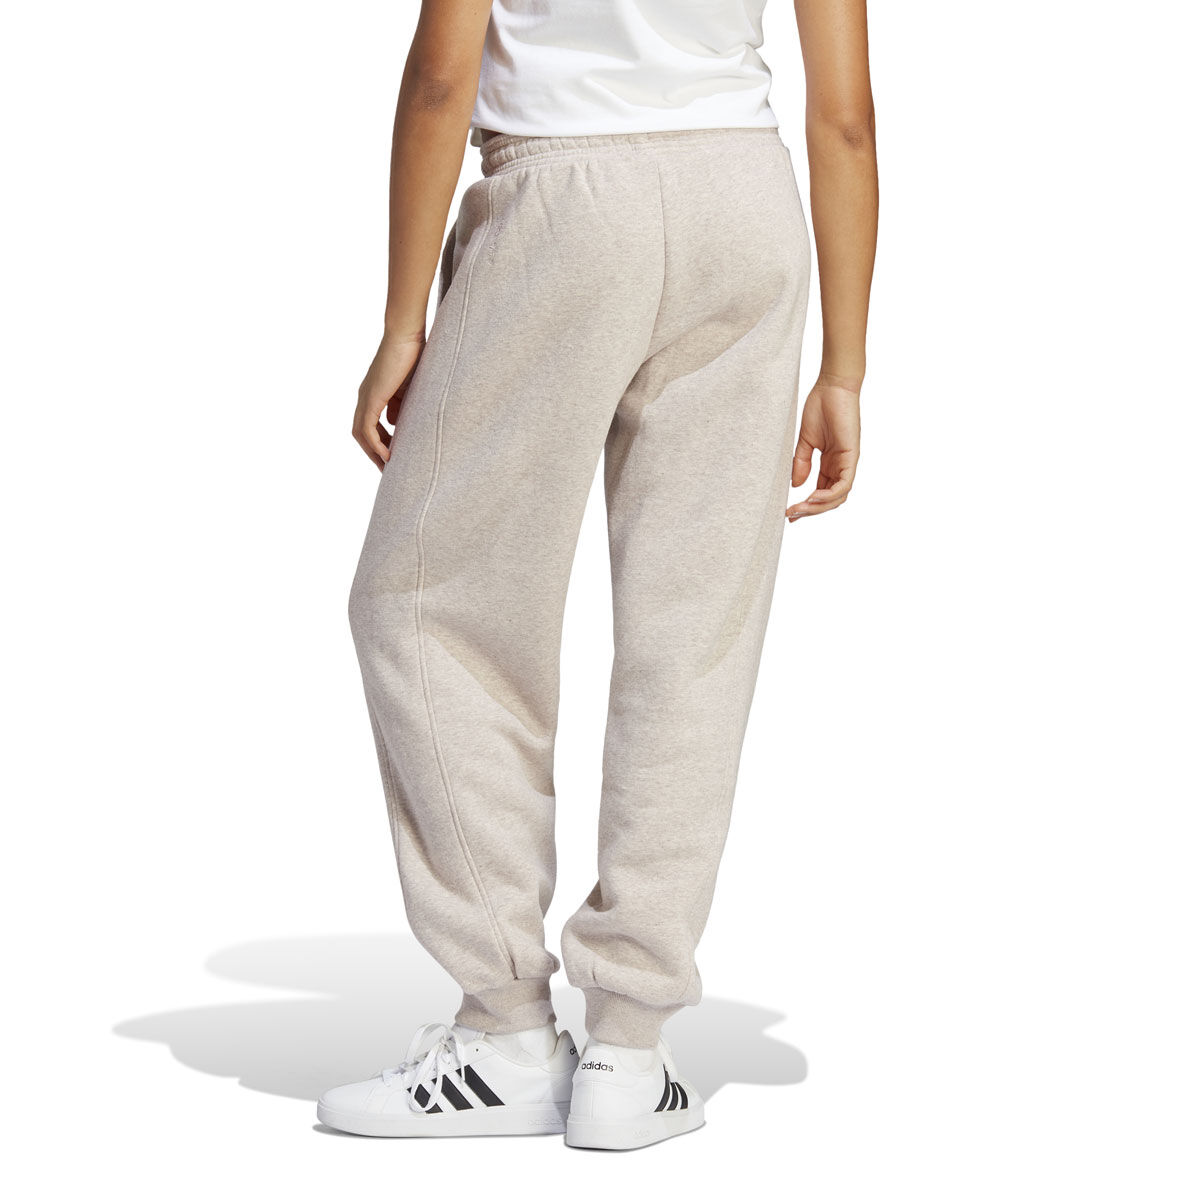 adidas Womens ALL SZN Fleece Jogger Pants Taupe S, Taupe, rebel_hi-res